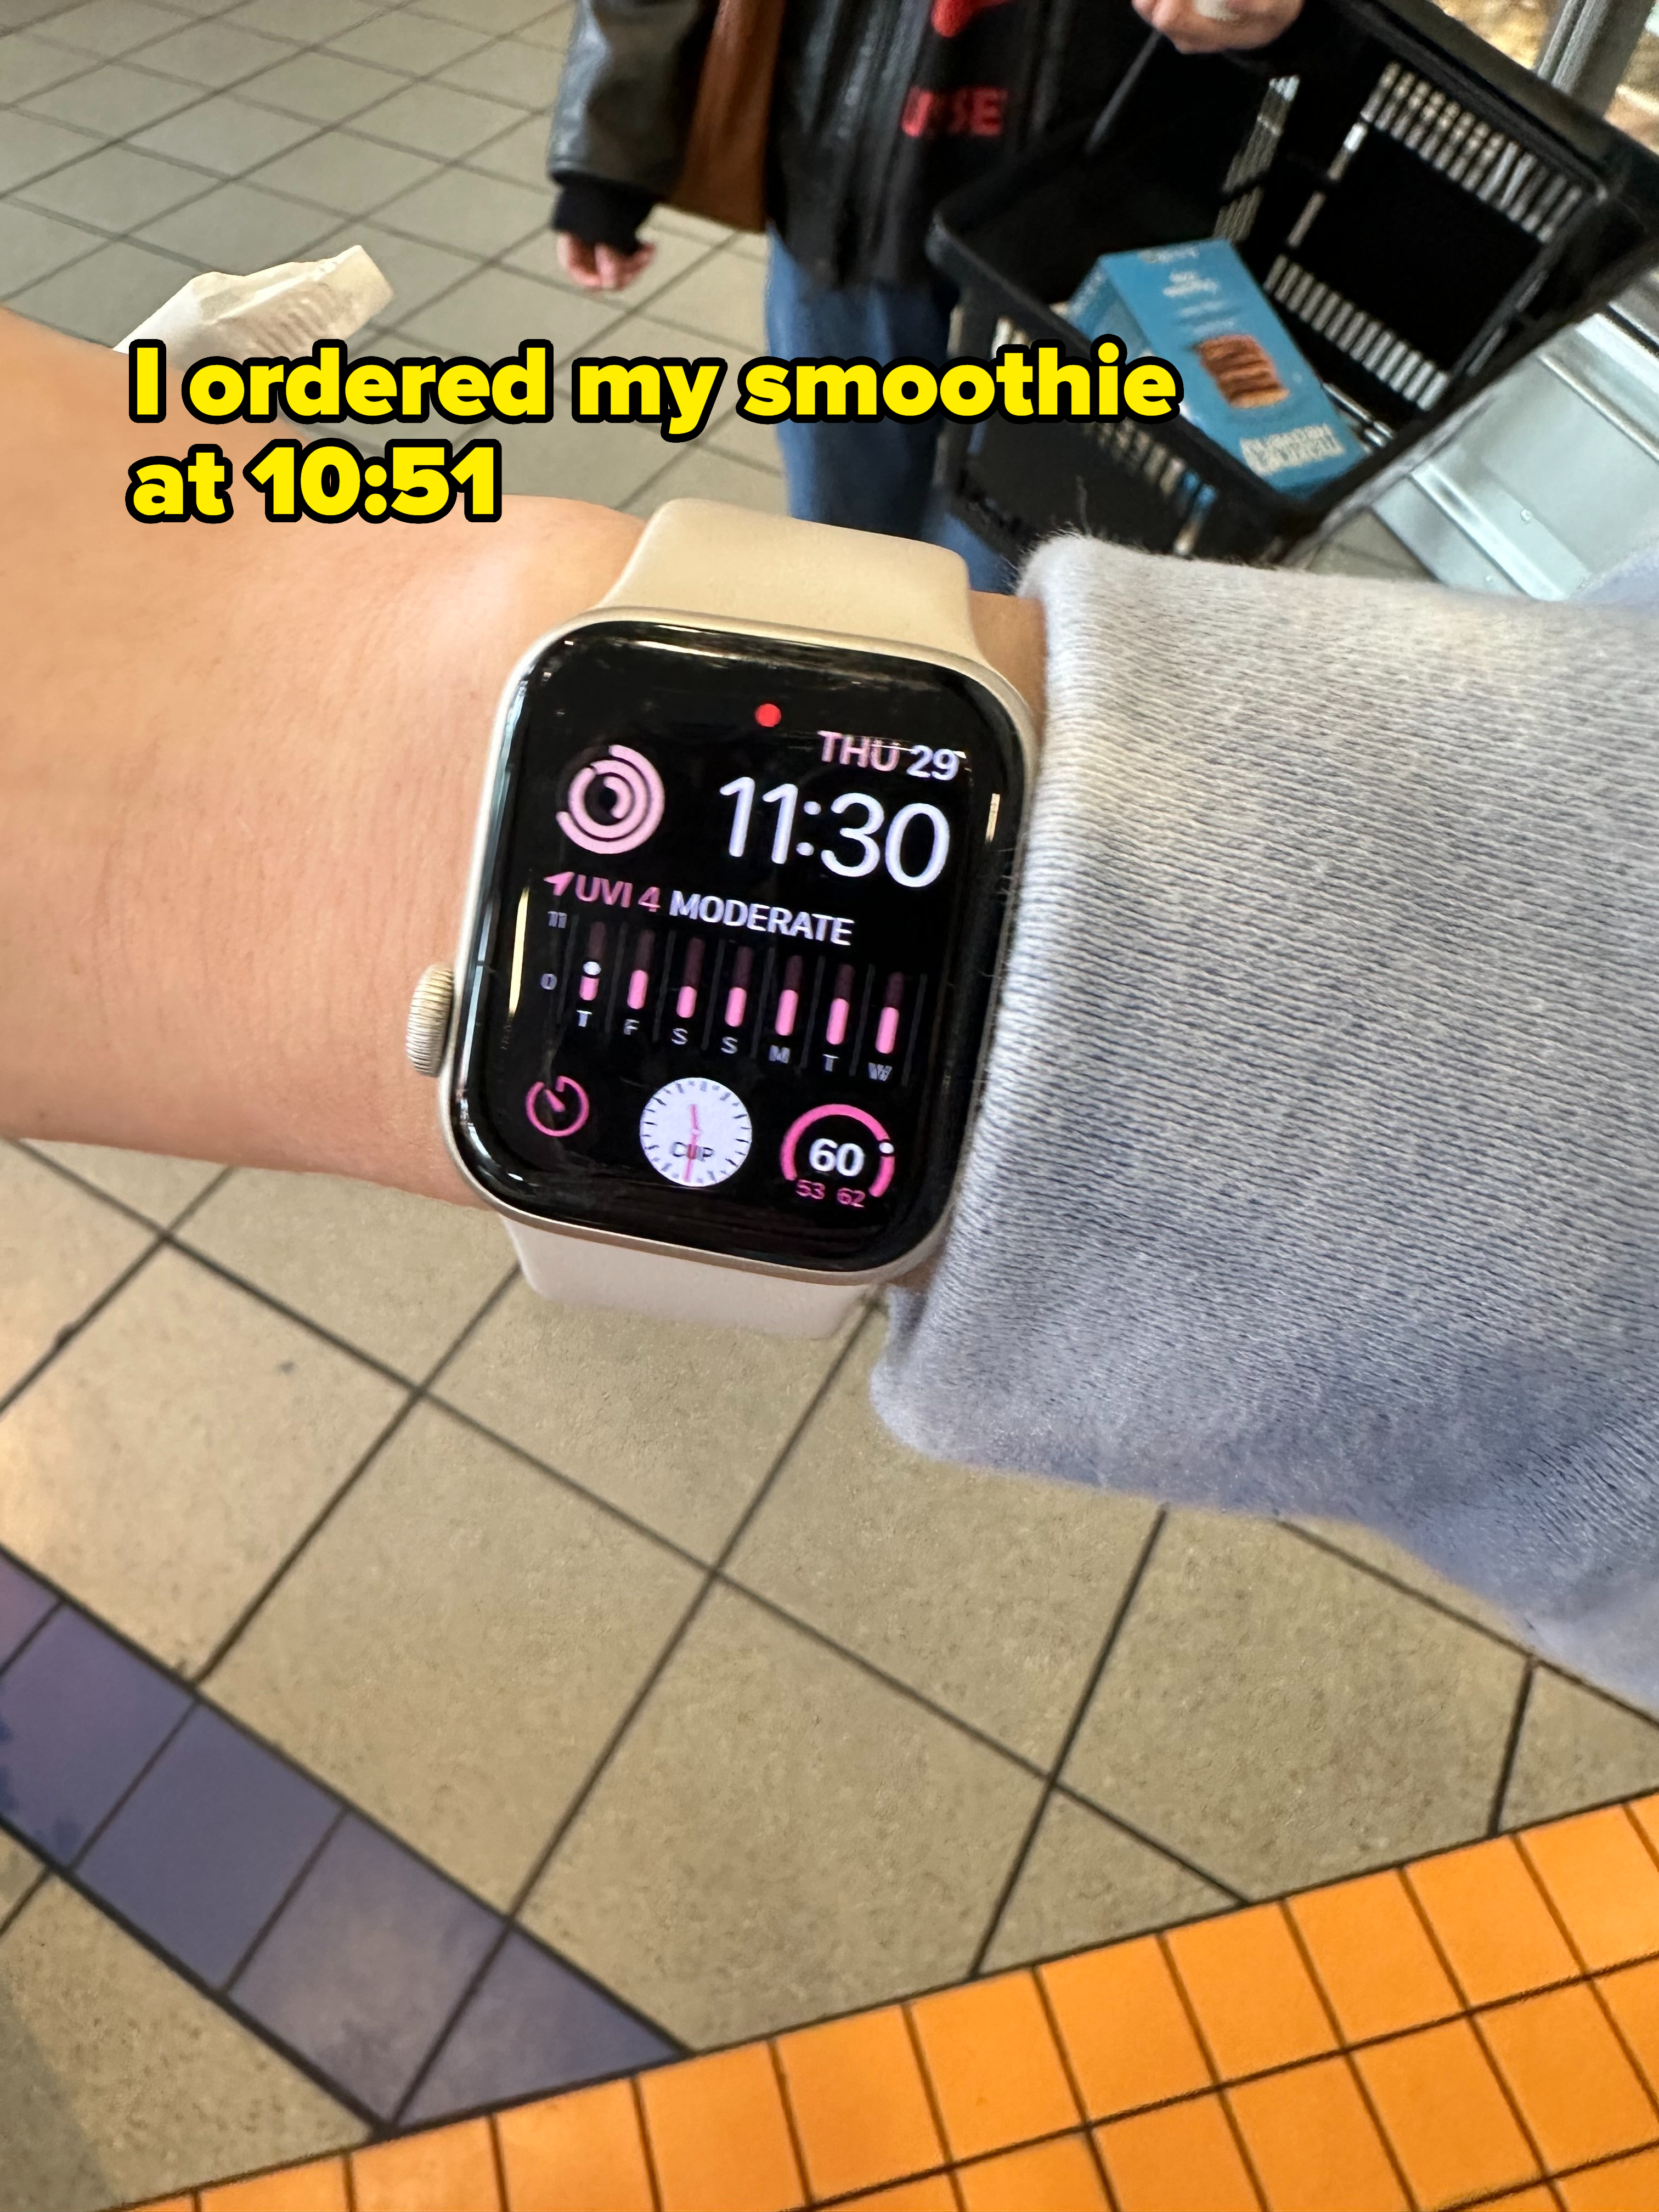 apple watching showing the time as 11:30 with text overlaid saying, i ordered my smoothie at 10:51